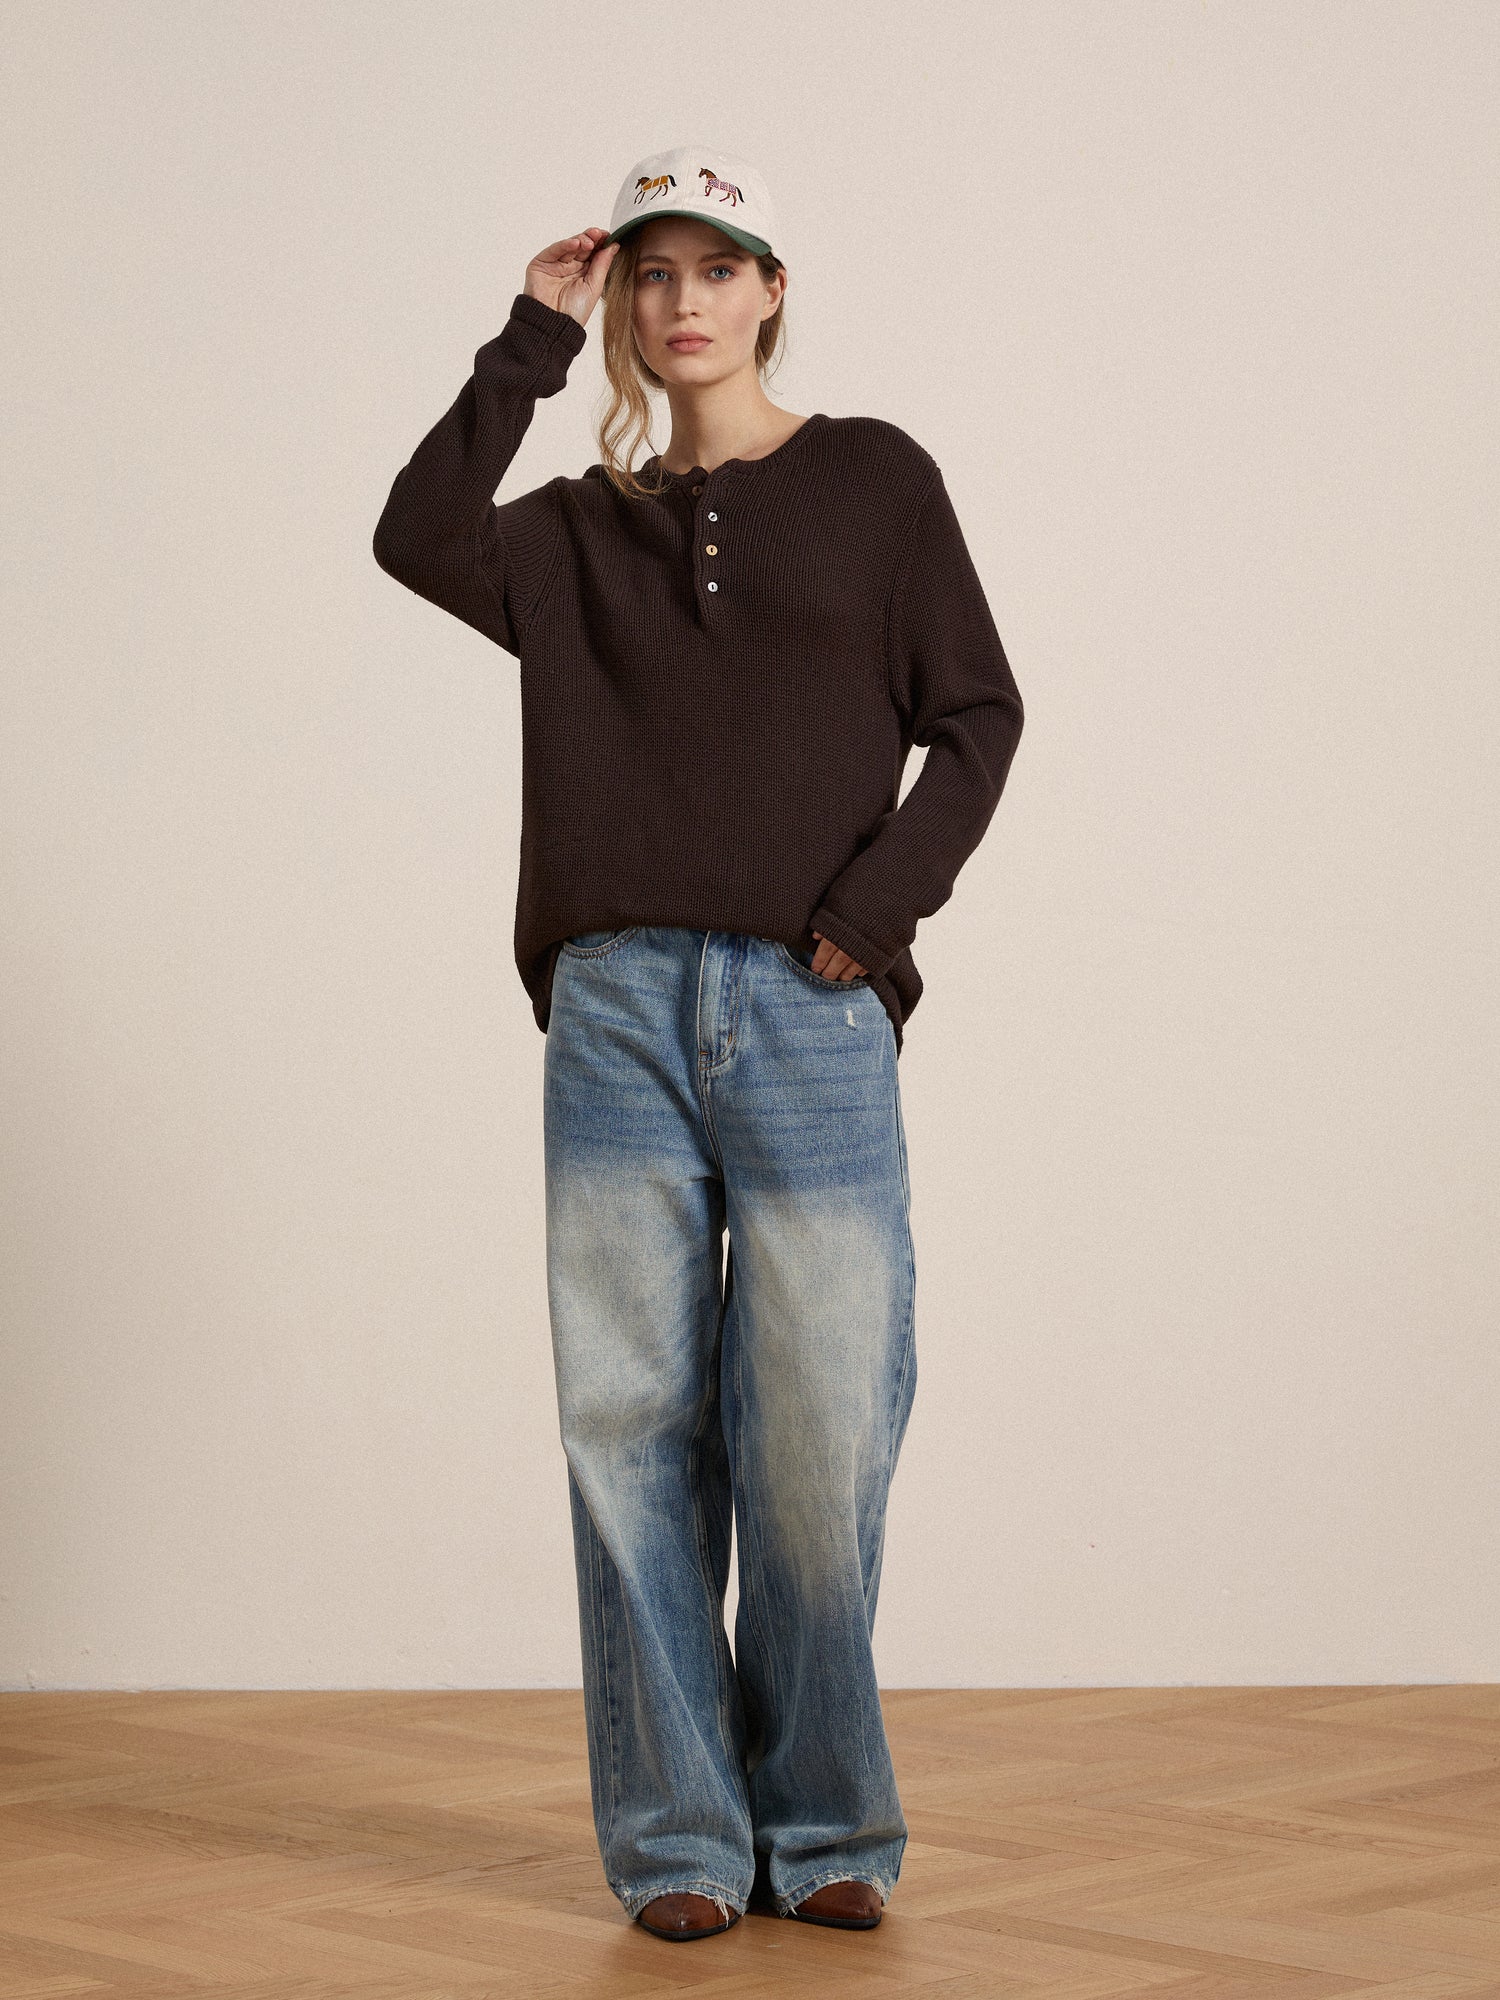 A woman wearing jeans and a Profound Knit Henley hat.